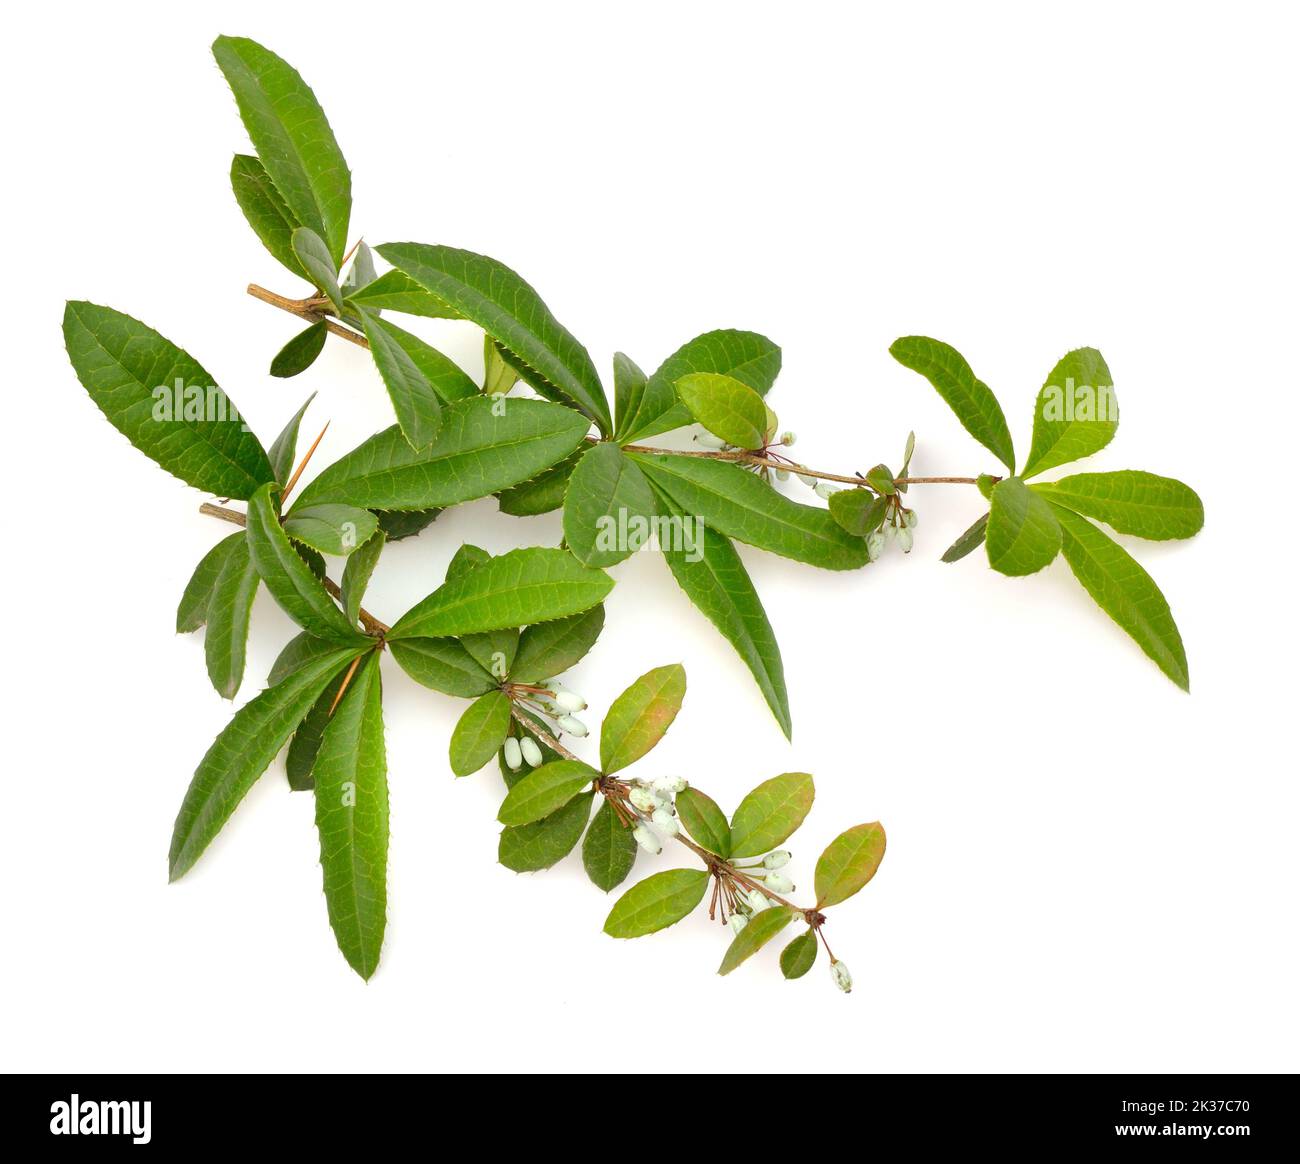 Berberis julianae, the wintergreen barberry or Chinese barberry. Isolated on white background. Stock Photo